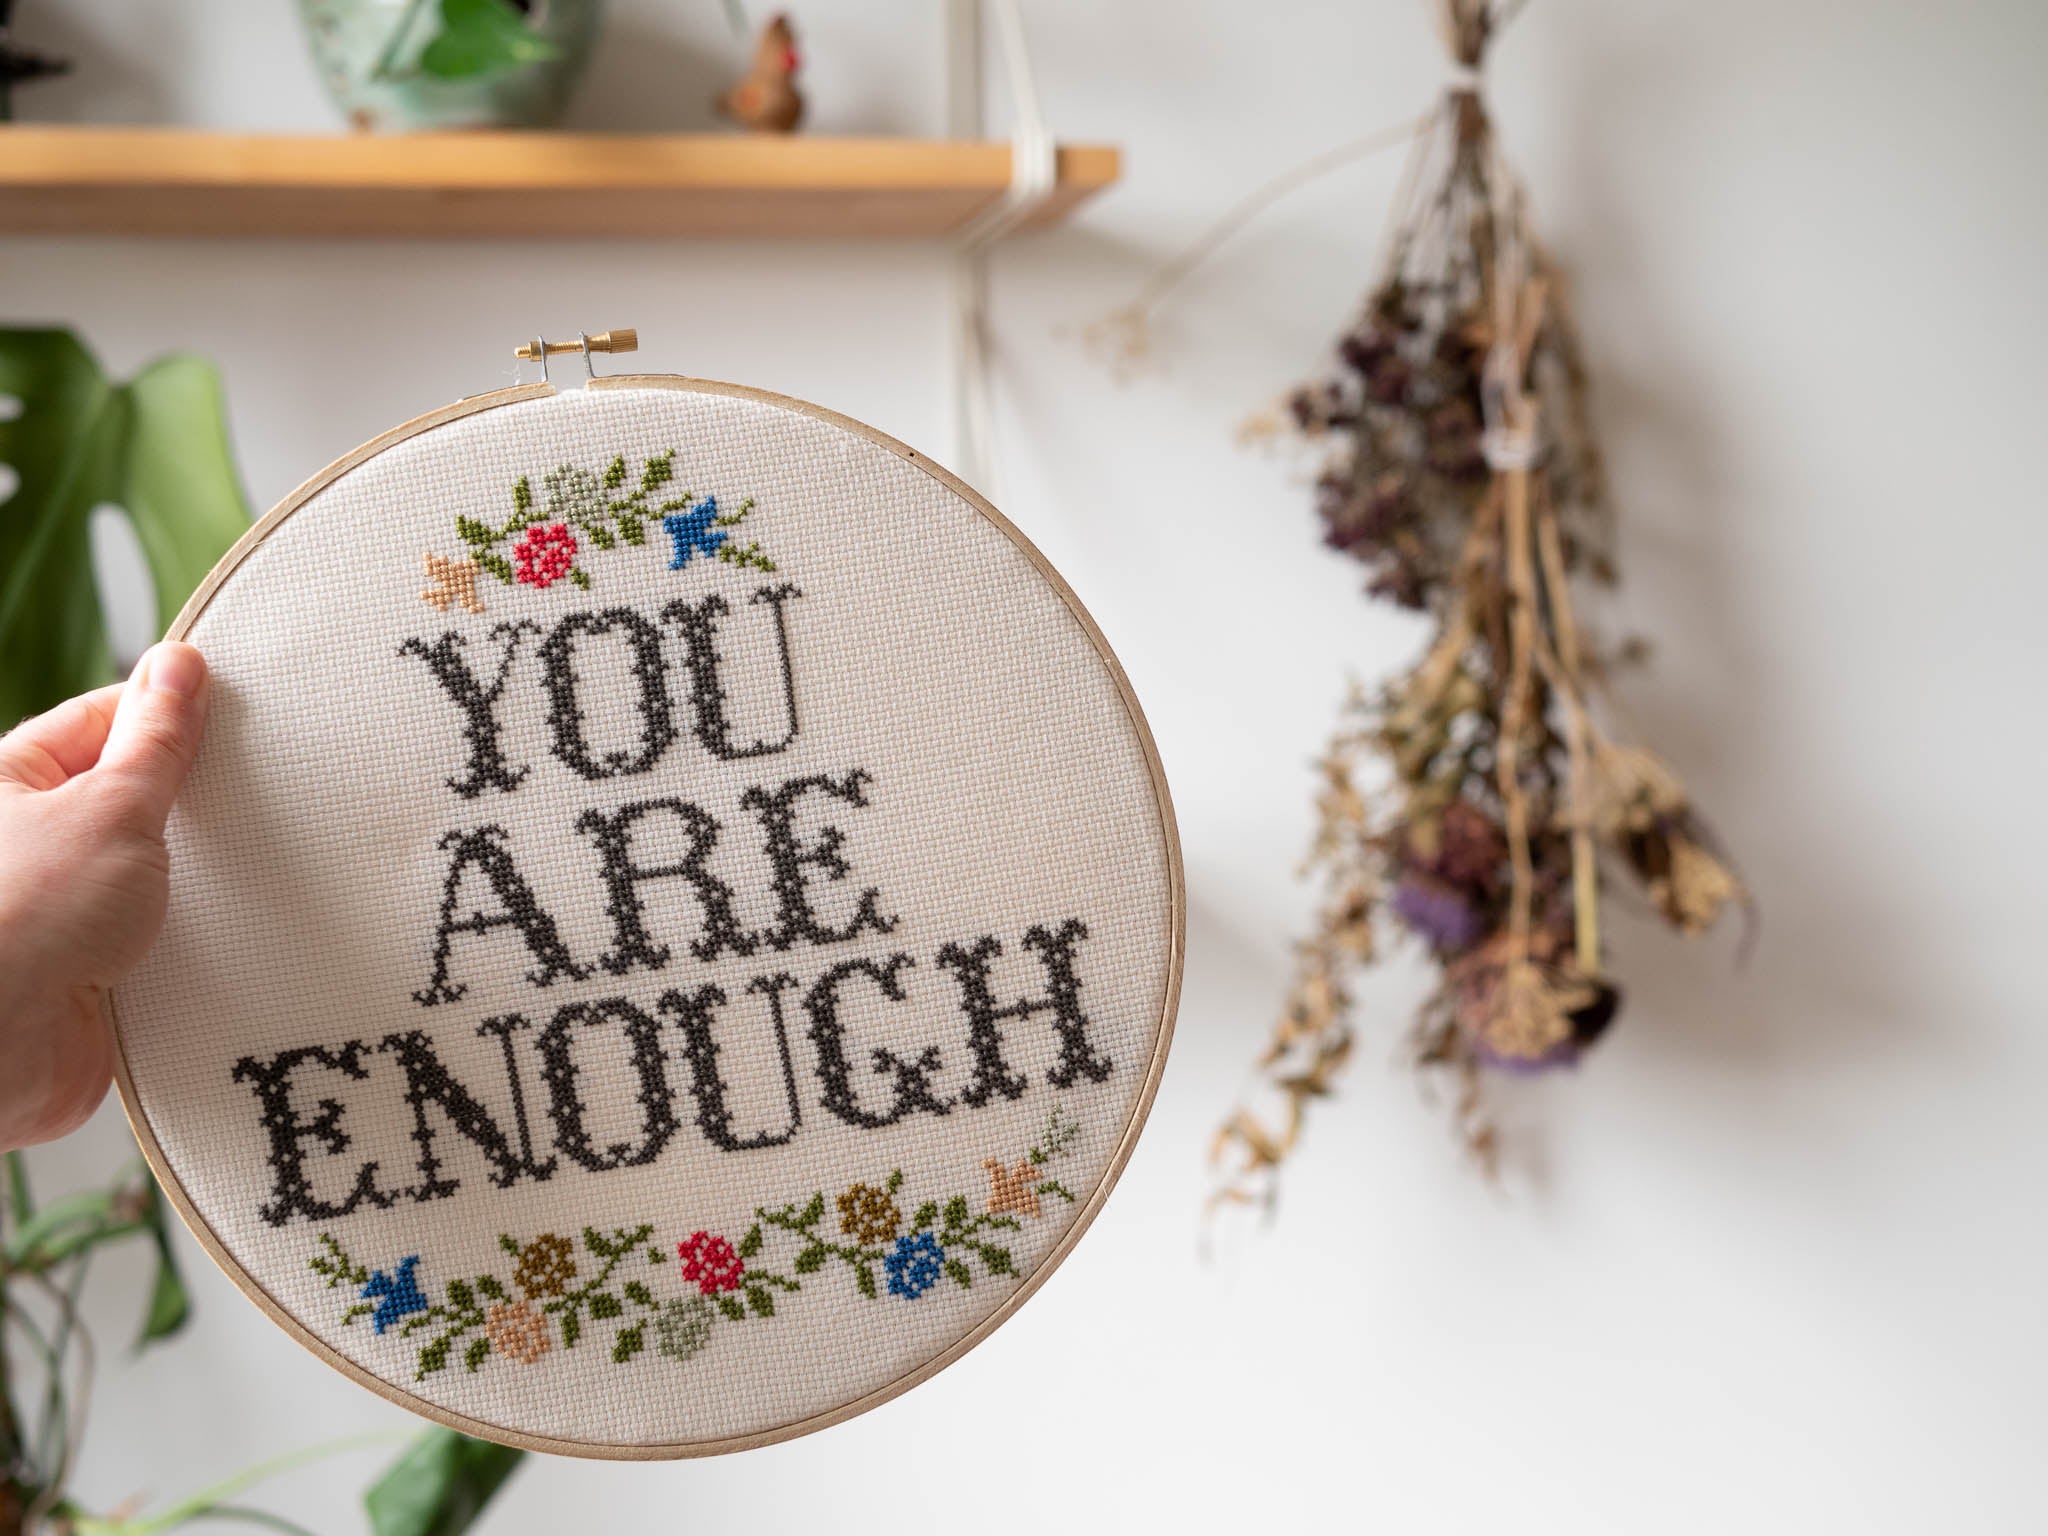 Finally finished this little embroidery hoop! Now off to picking